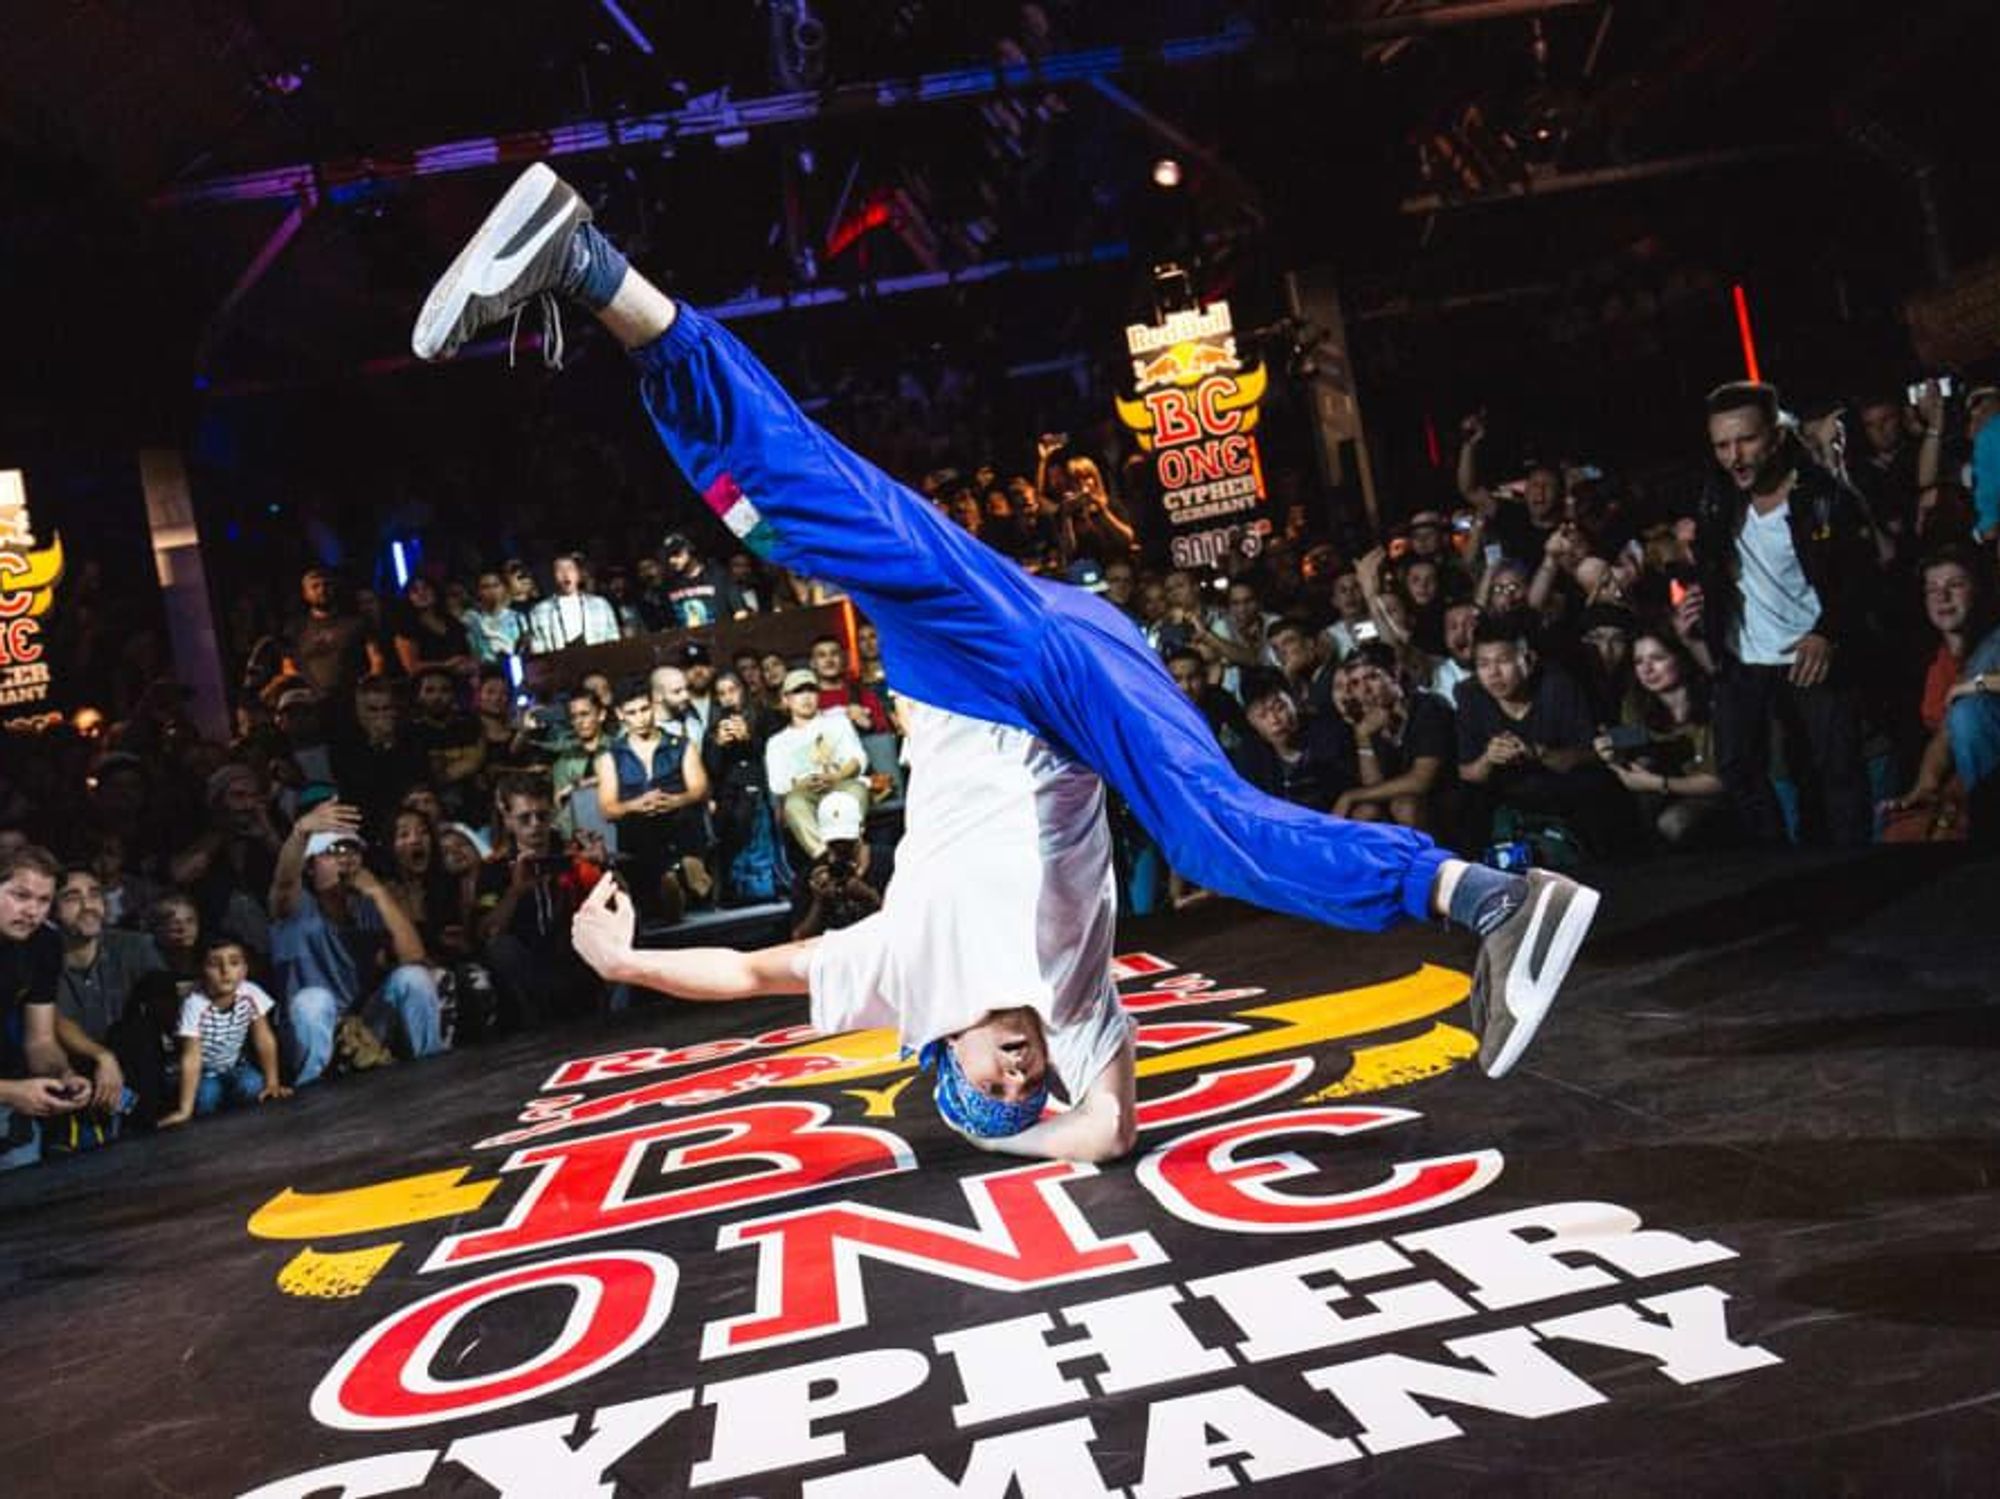 ressource Fordi Forfatter World's largest breakdancing competition pops and locks into Houston -  CultureMap Houston